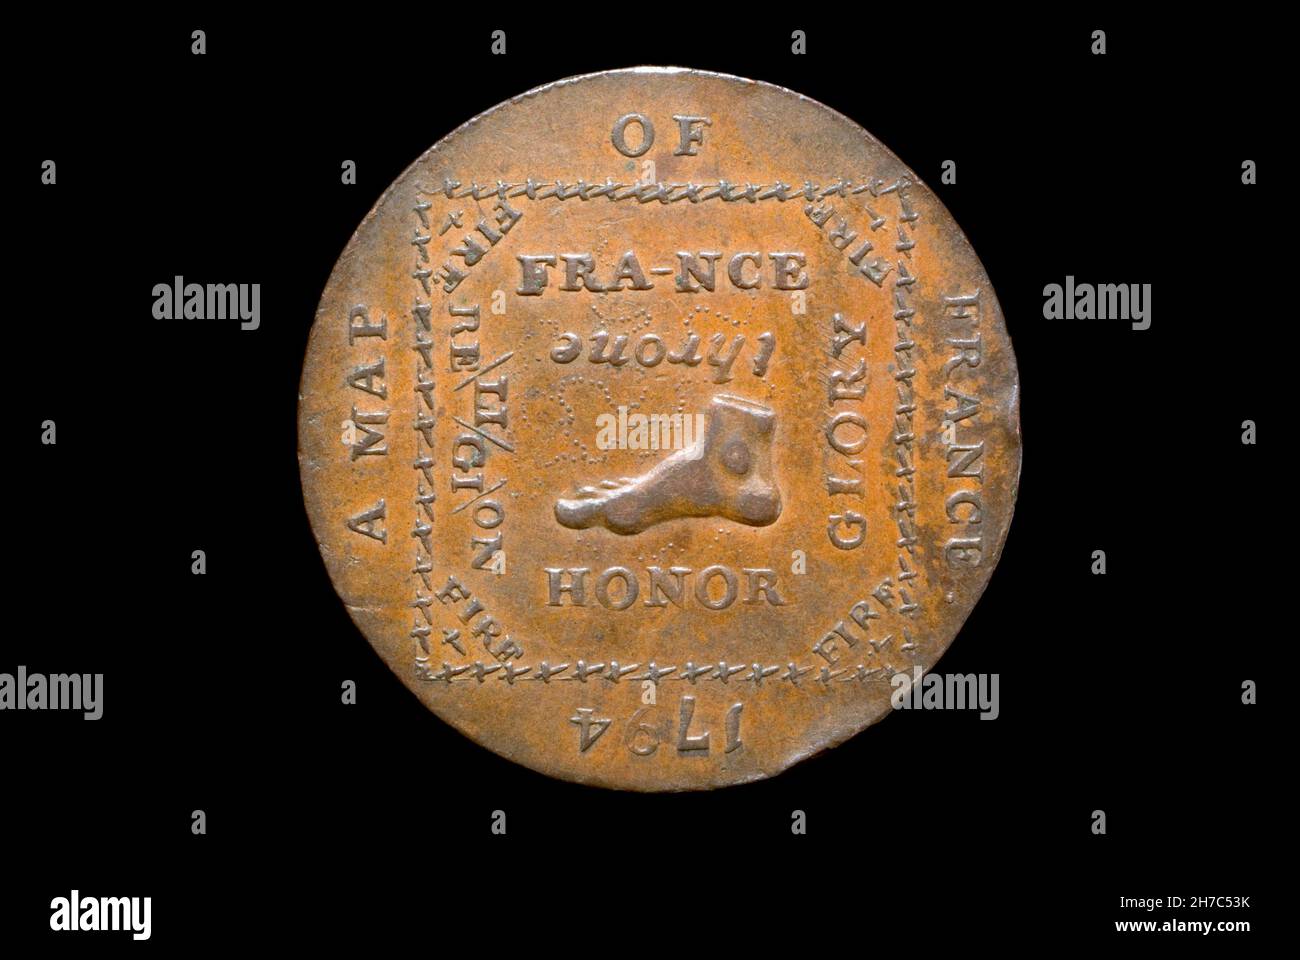 Middlesex ½ Penny Token 1794 Stock Photo